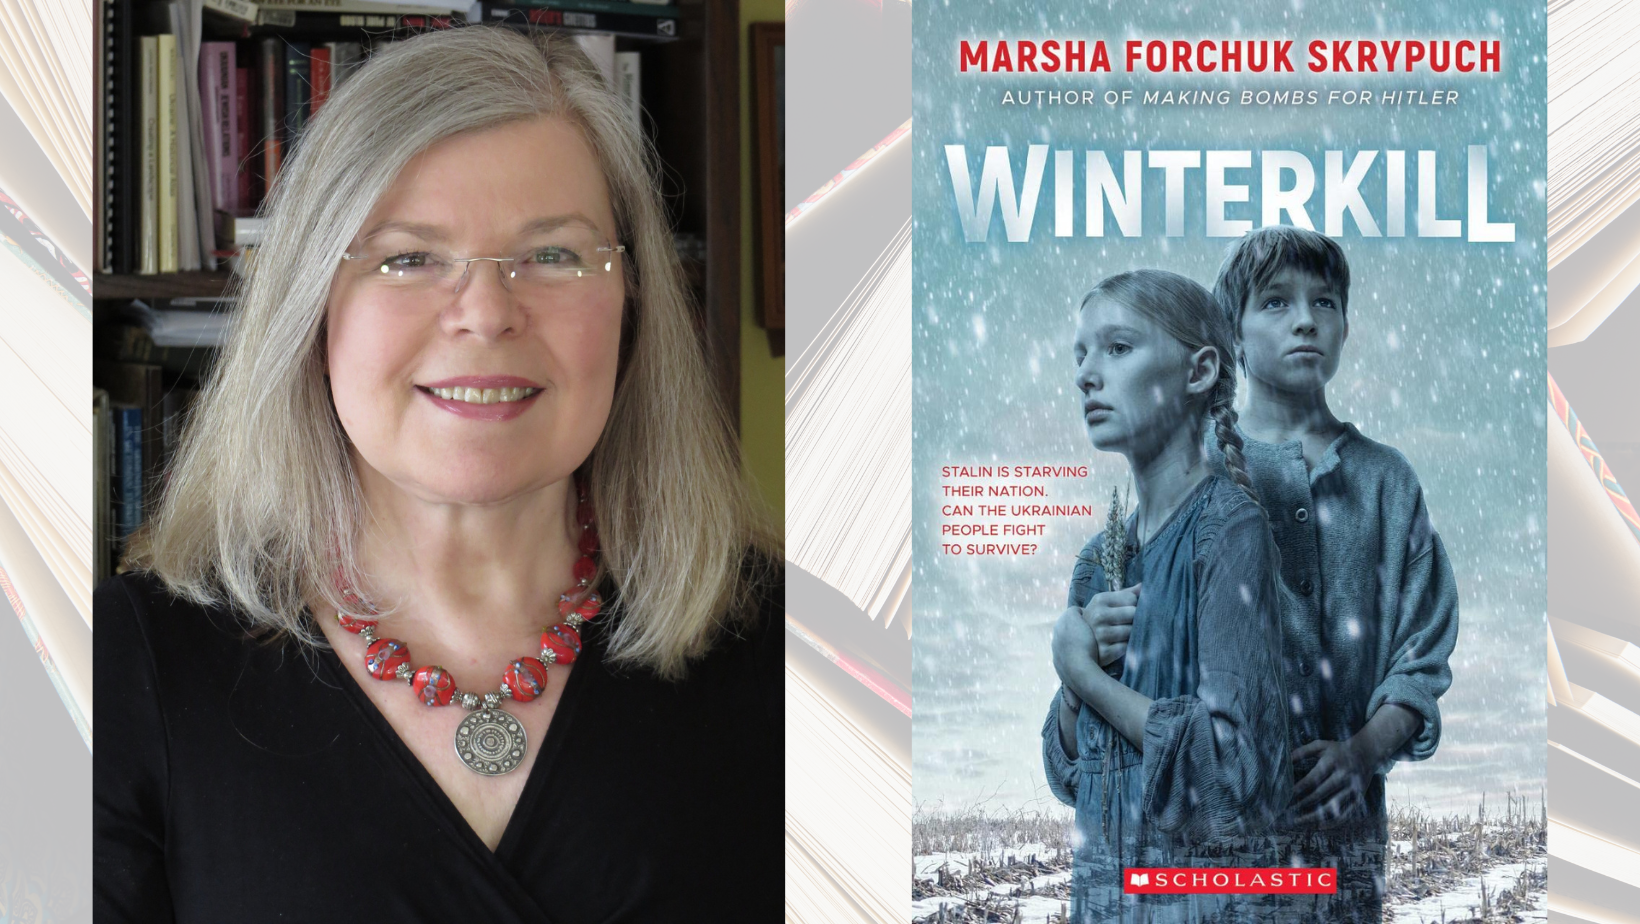 photo of marsha skrypuch and the cover of her book winterki;ll